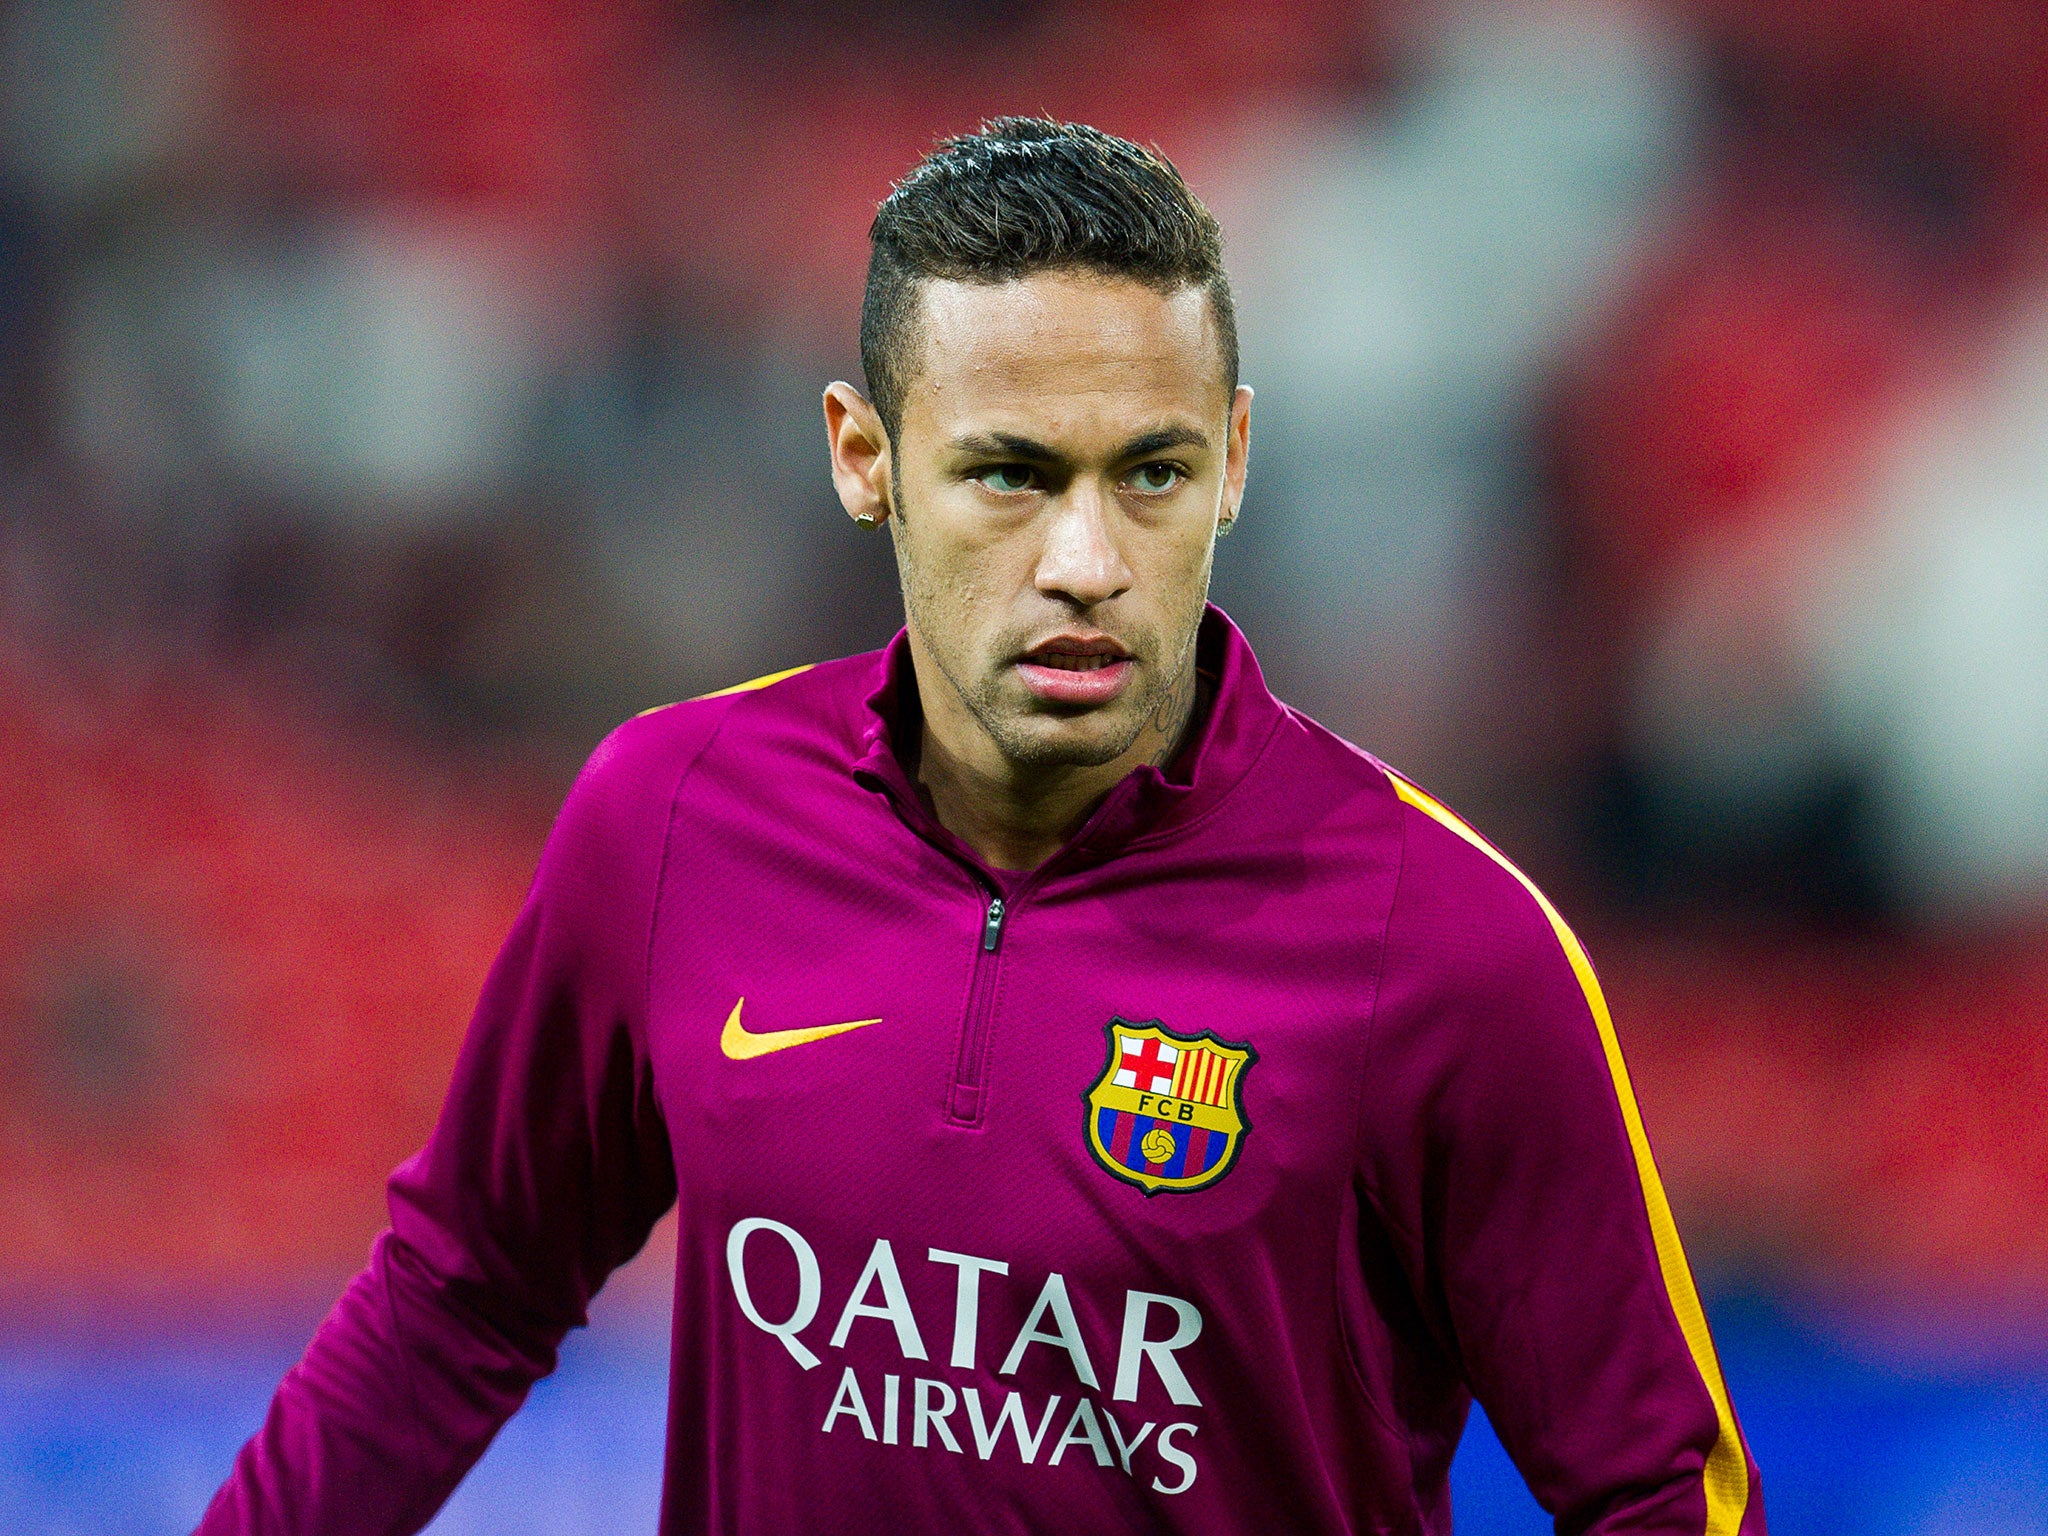 Barcelona forward Neymar is wanted by both Manchester United and Manchester City